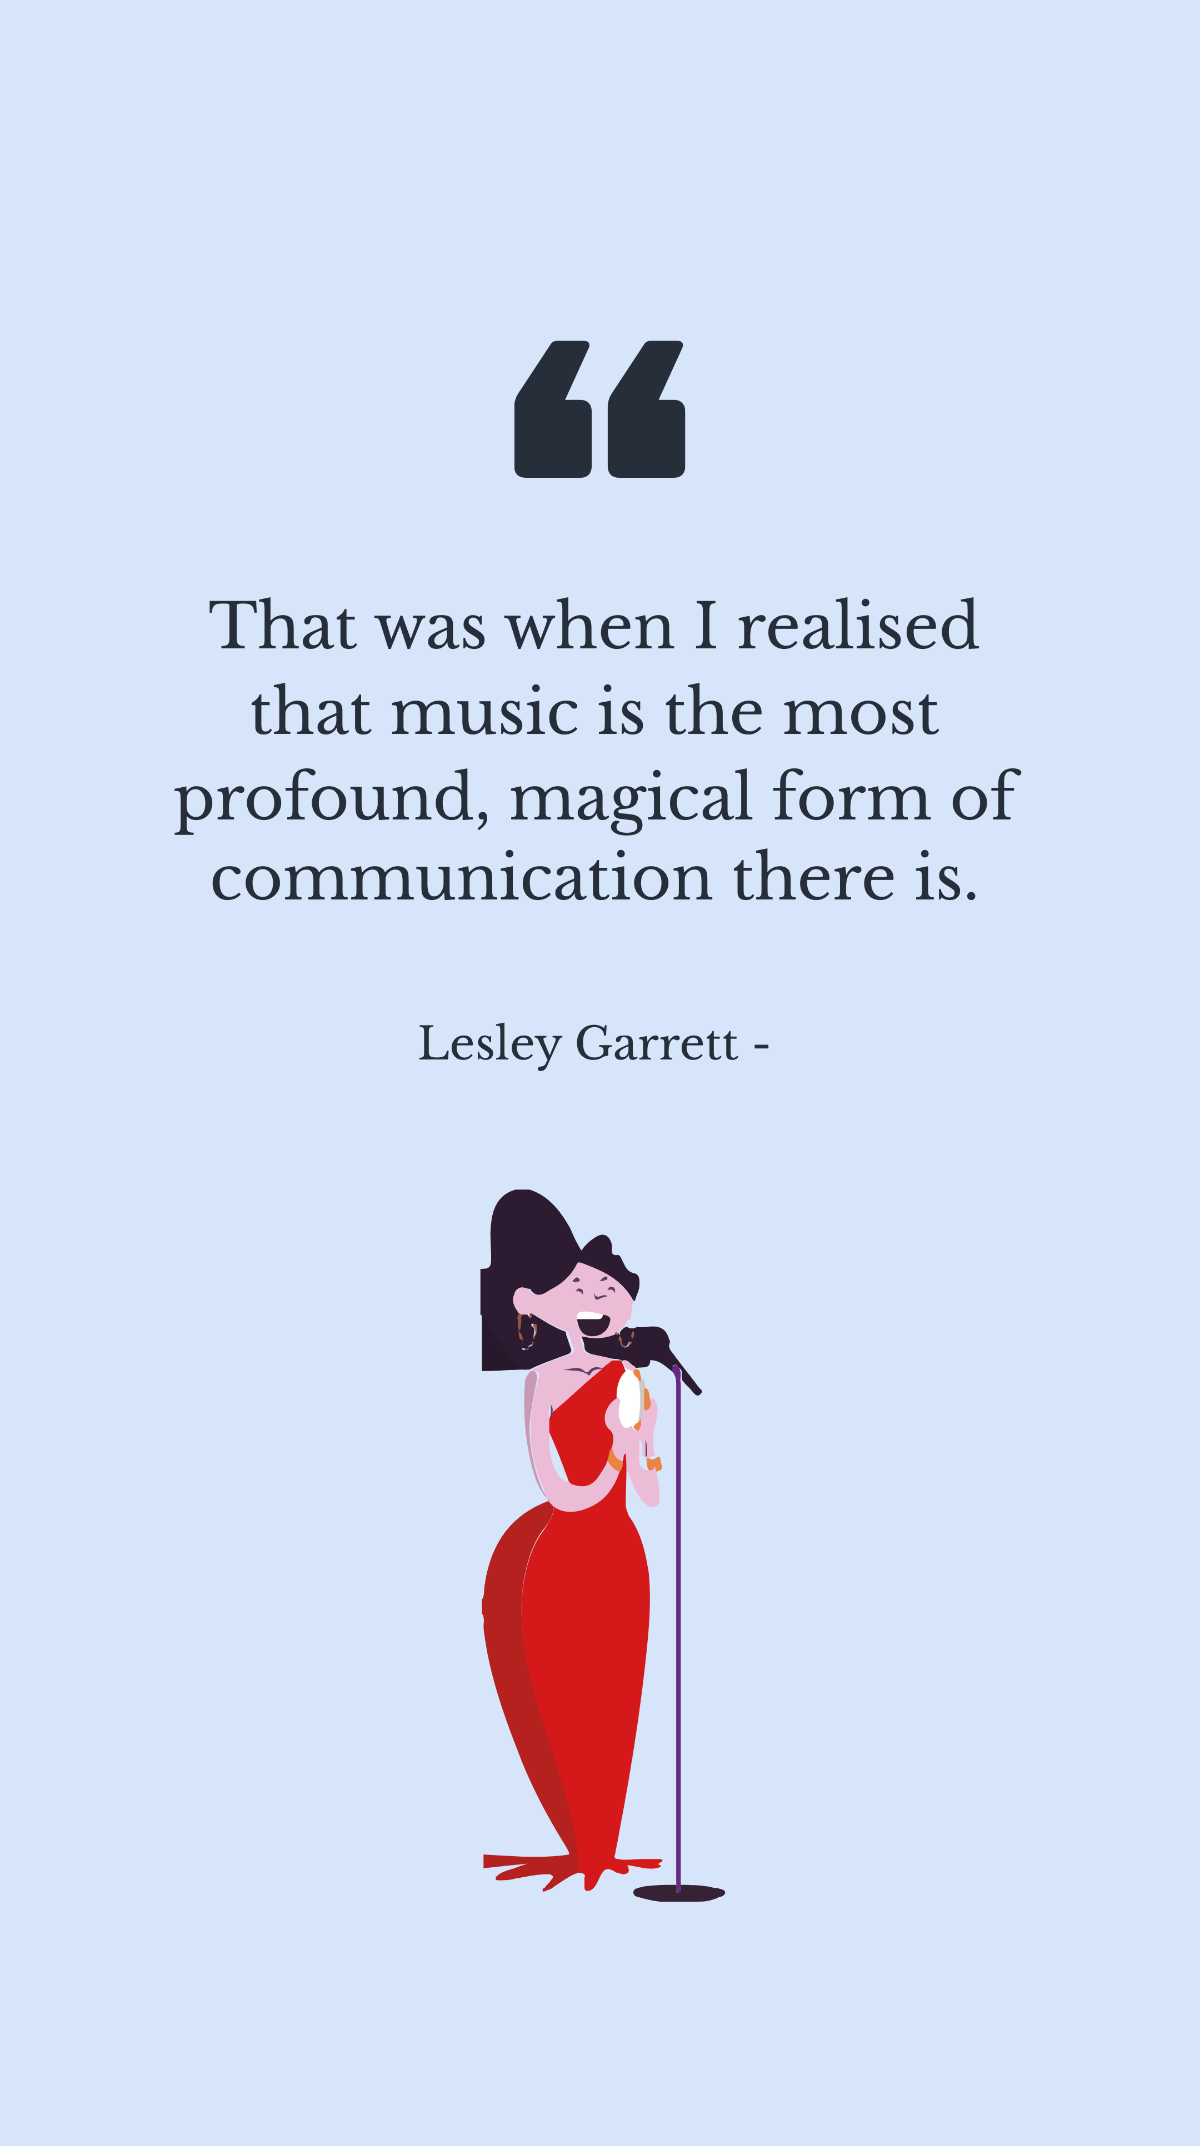 Lesley Garrett - That was when I realised that music is the most profound, magical form of communication there is. Template